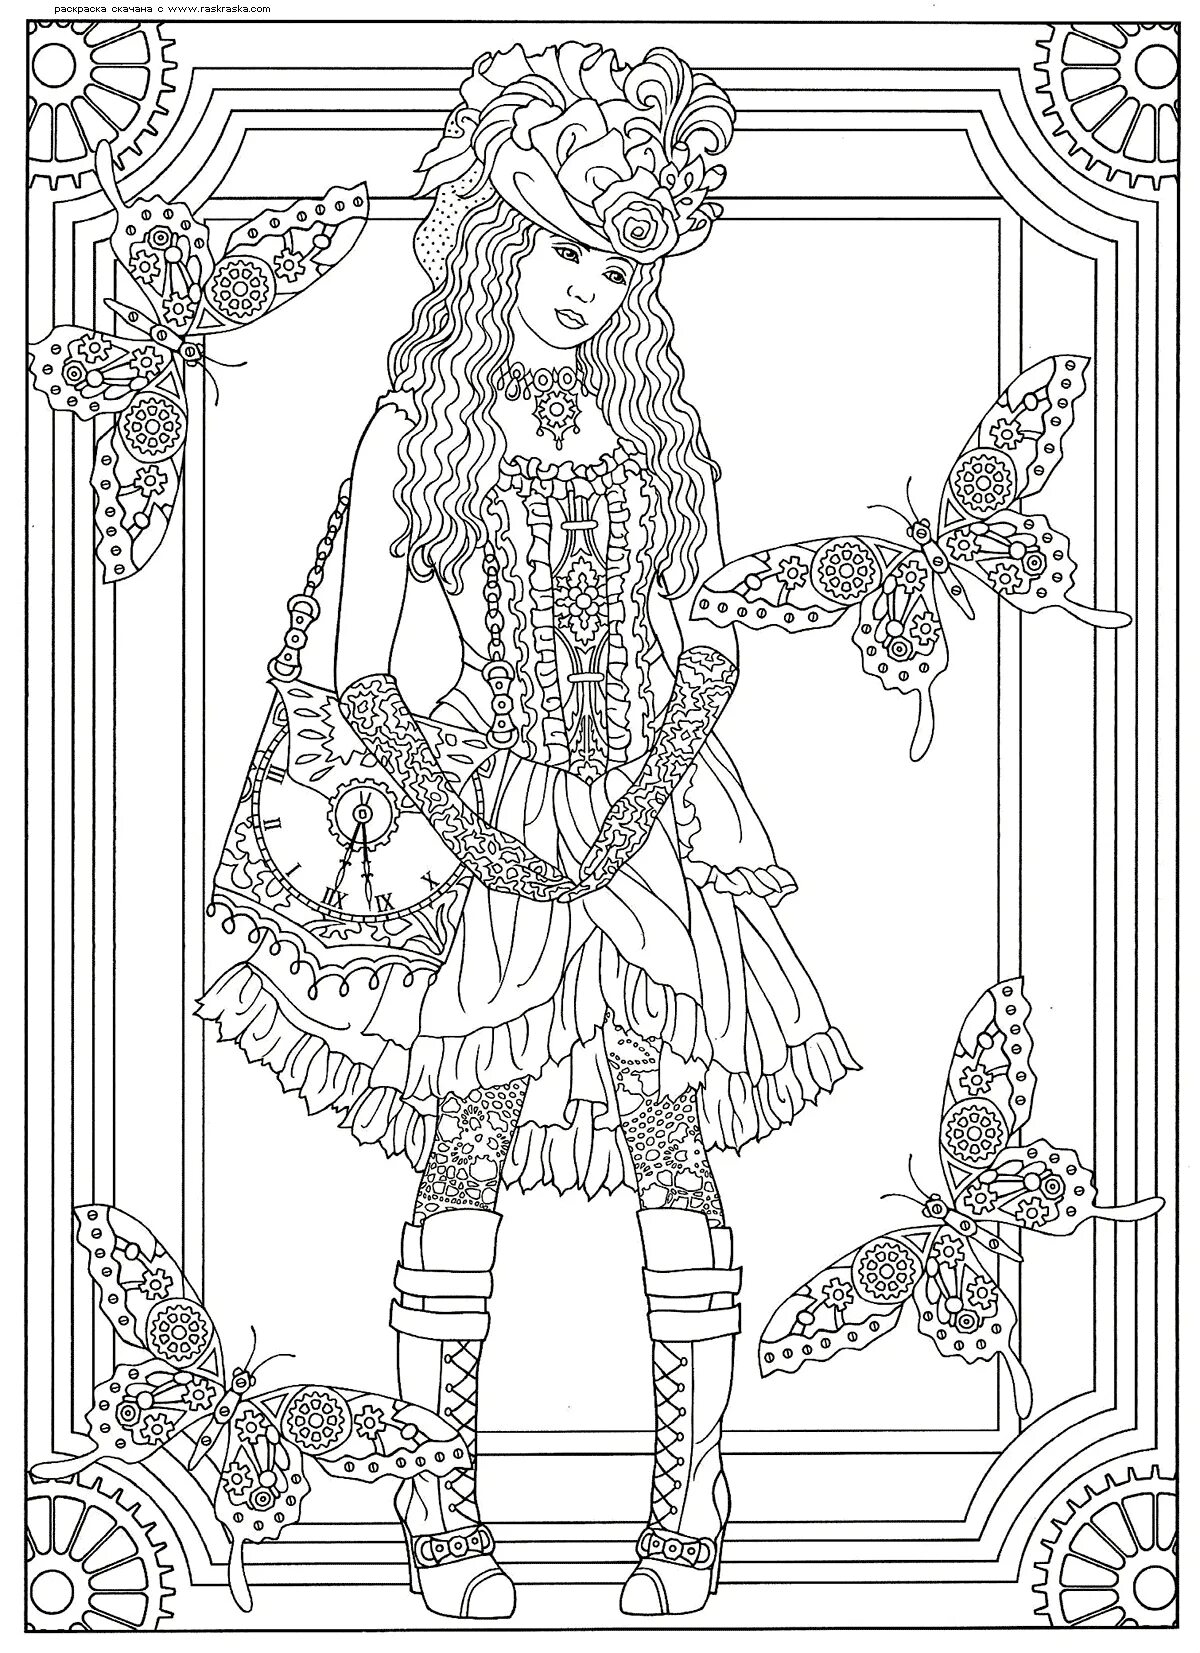 Steampunk captive coloring page